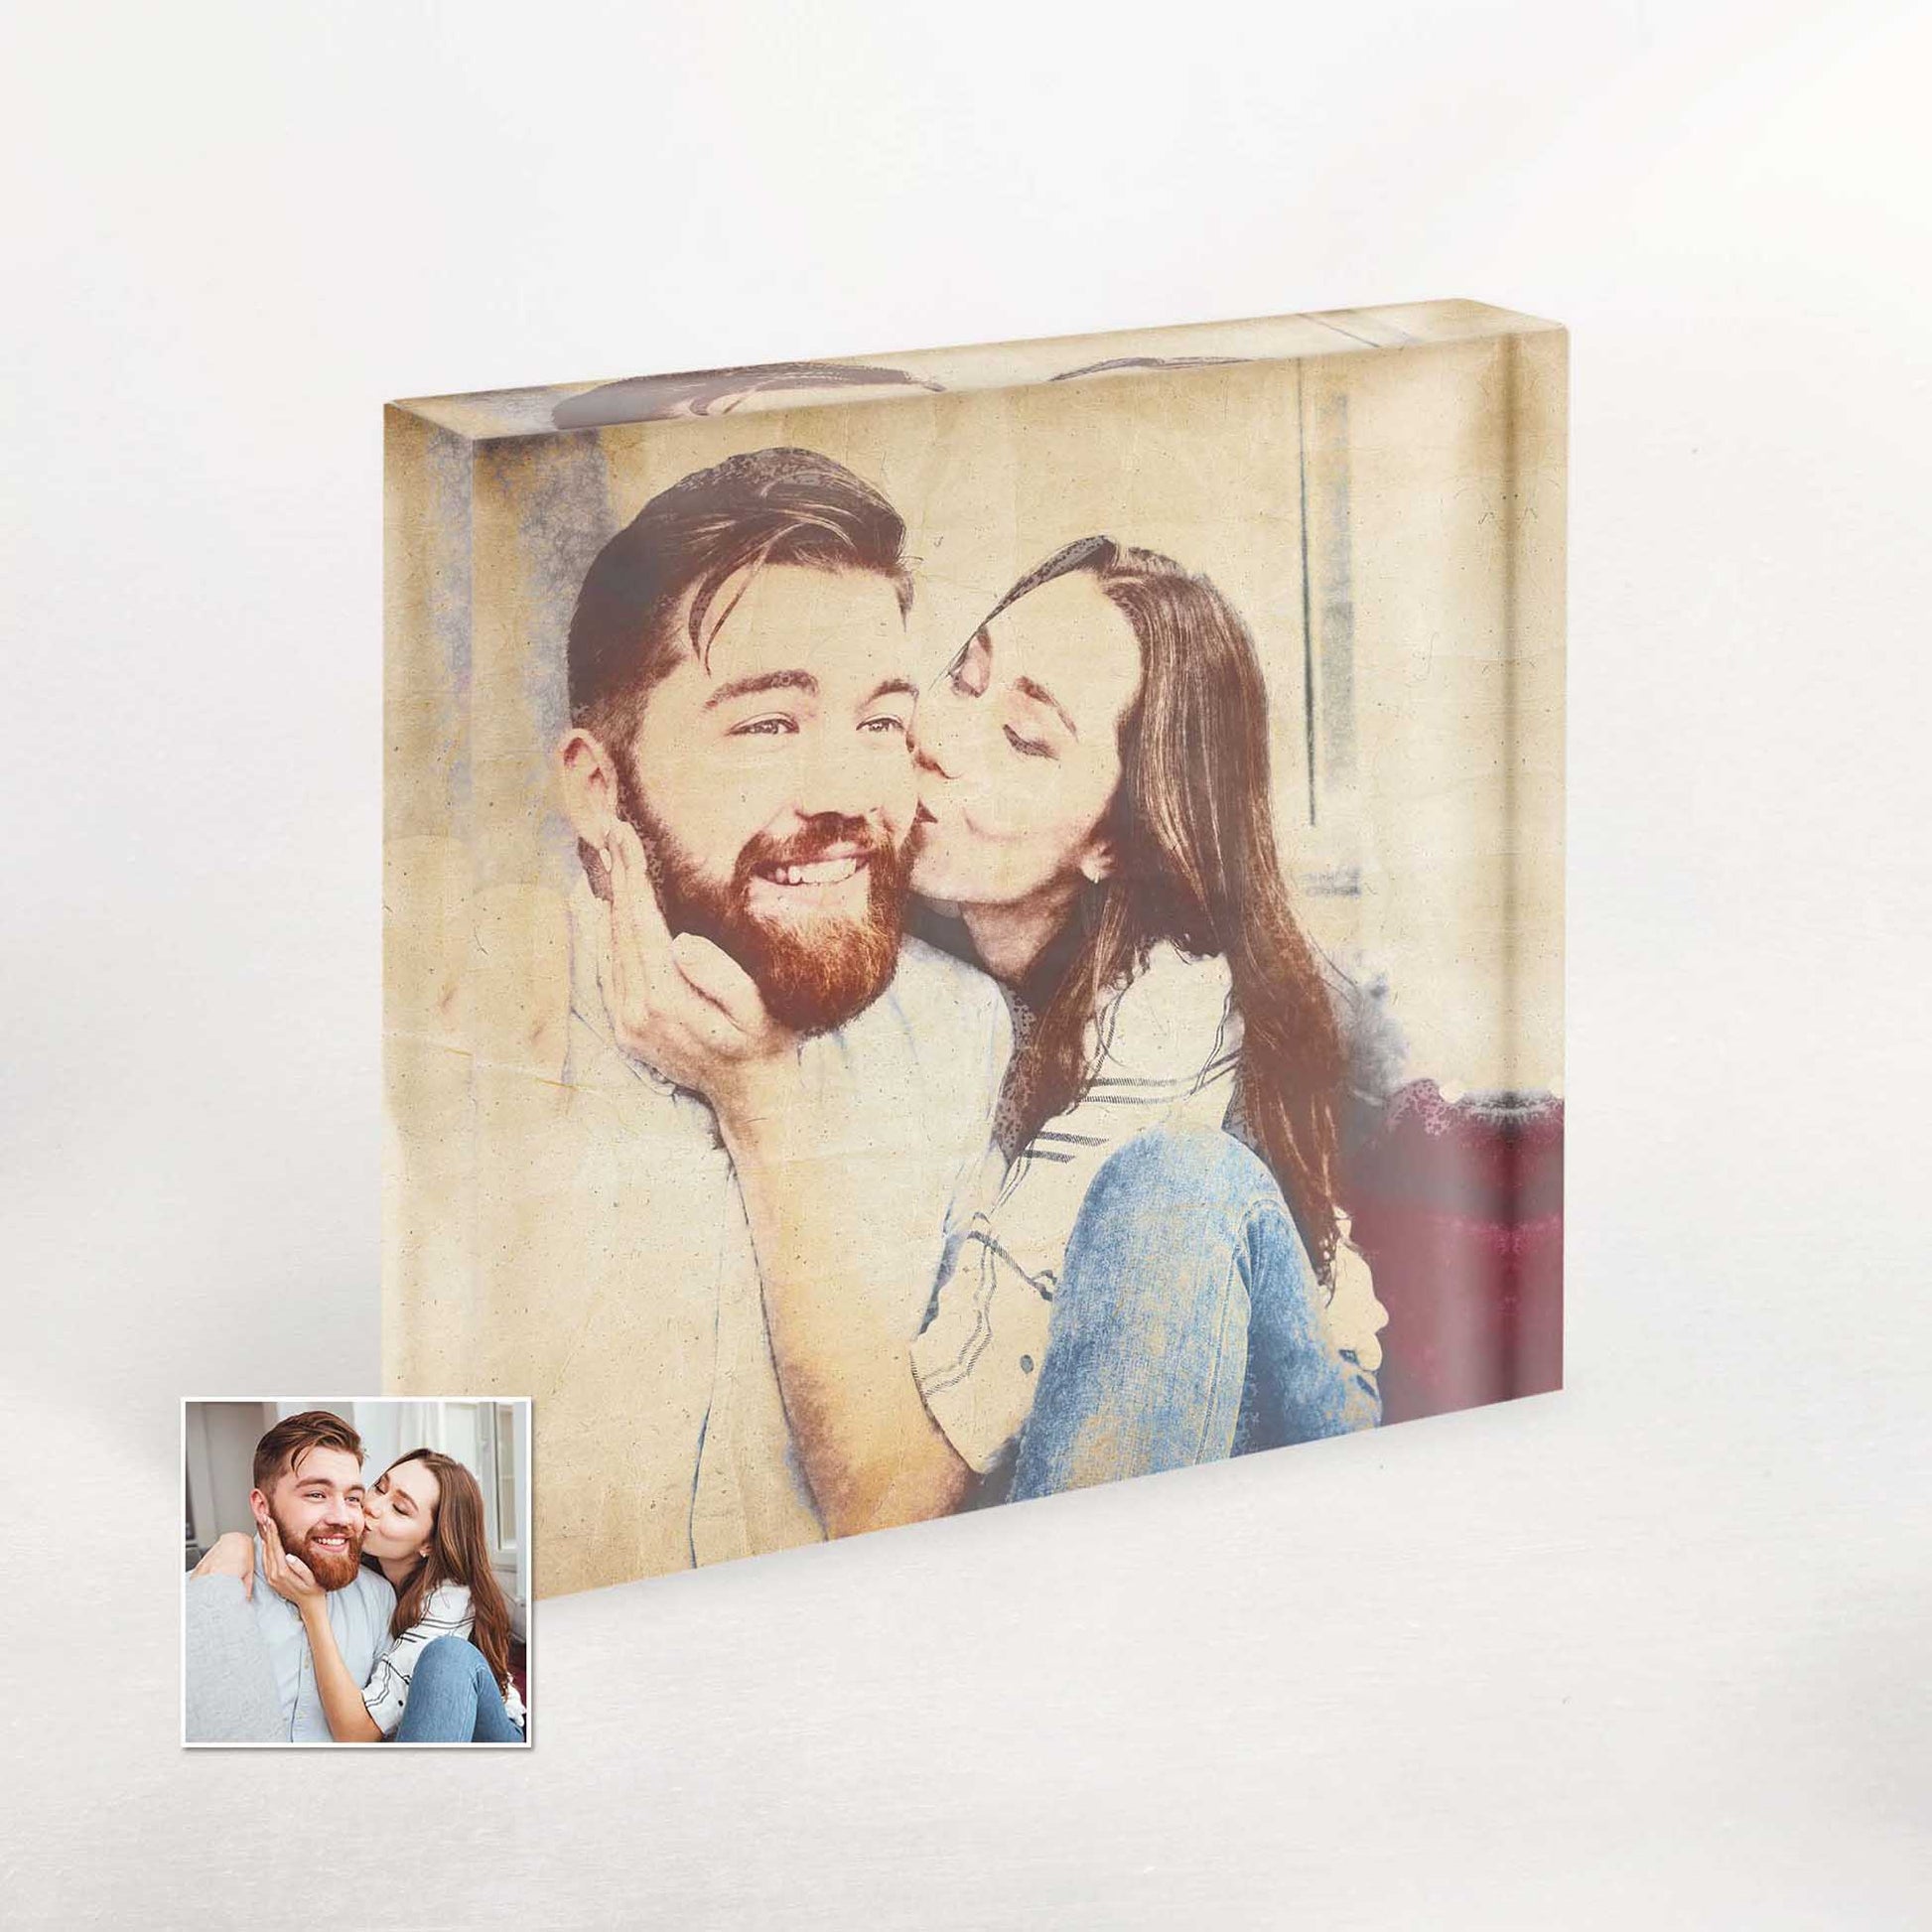 The Personalised Vintage Gouache Acrylic Block Photo is a true masterpiece of home decor. Its delicate and romantic design evokes feelings of nostalgia and love, making it an ideal anniversary gift or family keepsake